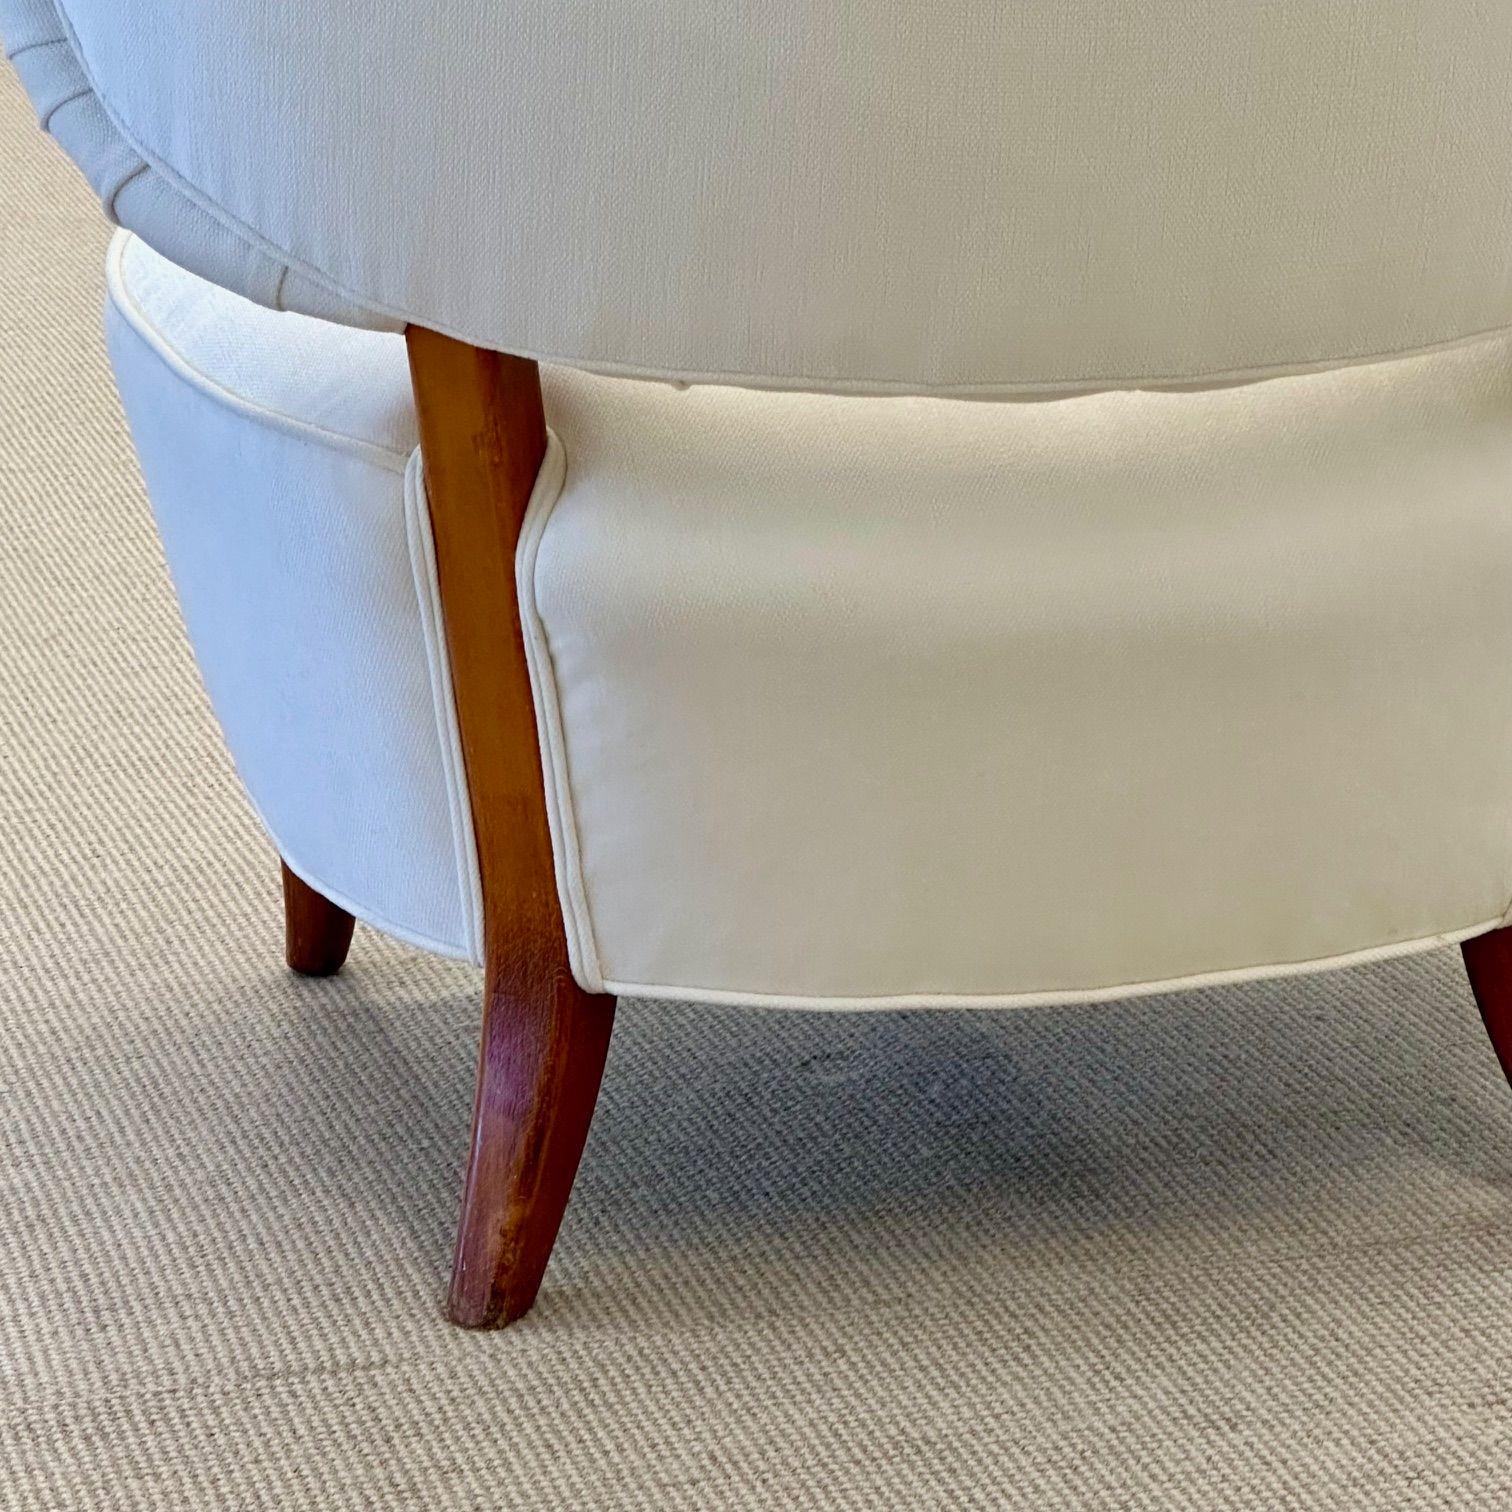 Otto Schulz, Mid-Century Lounge Chairs, White Velvet, Beech, Sweden, 1940s For Sale 5